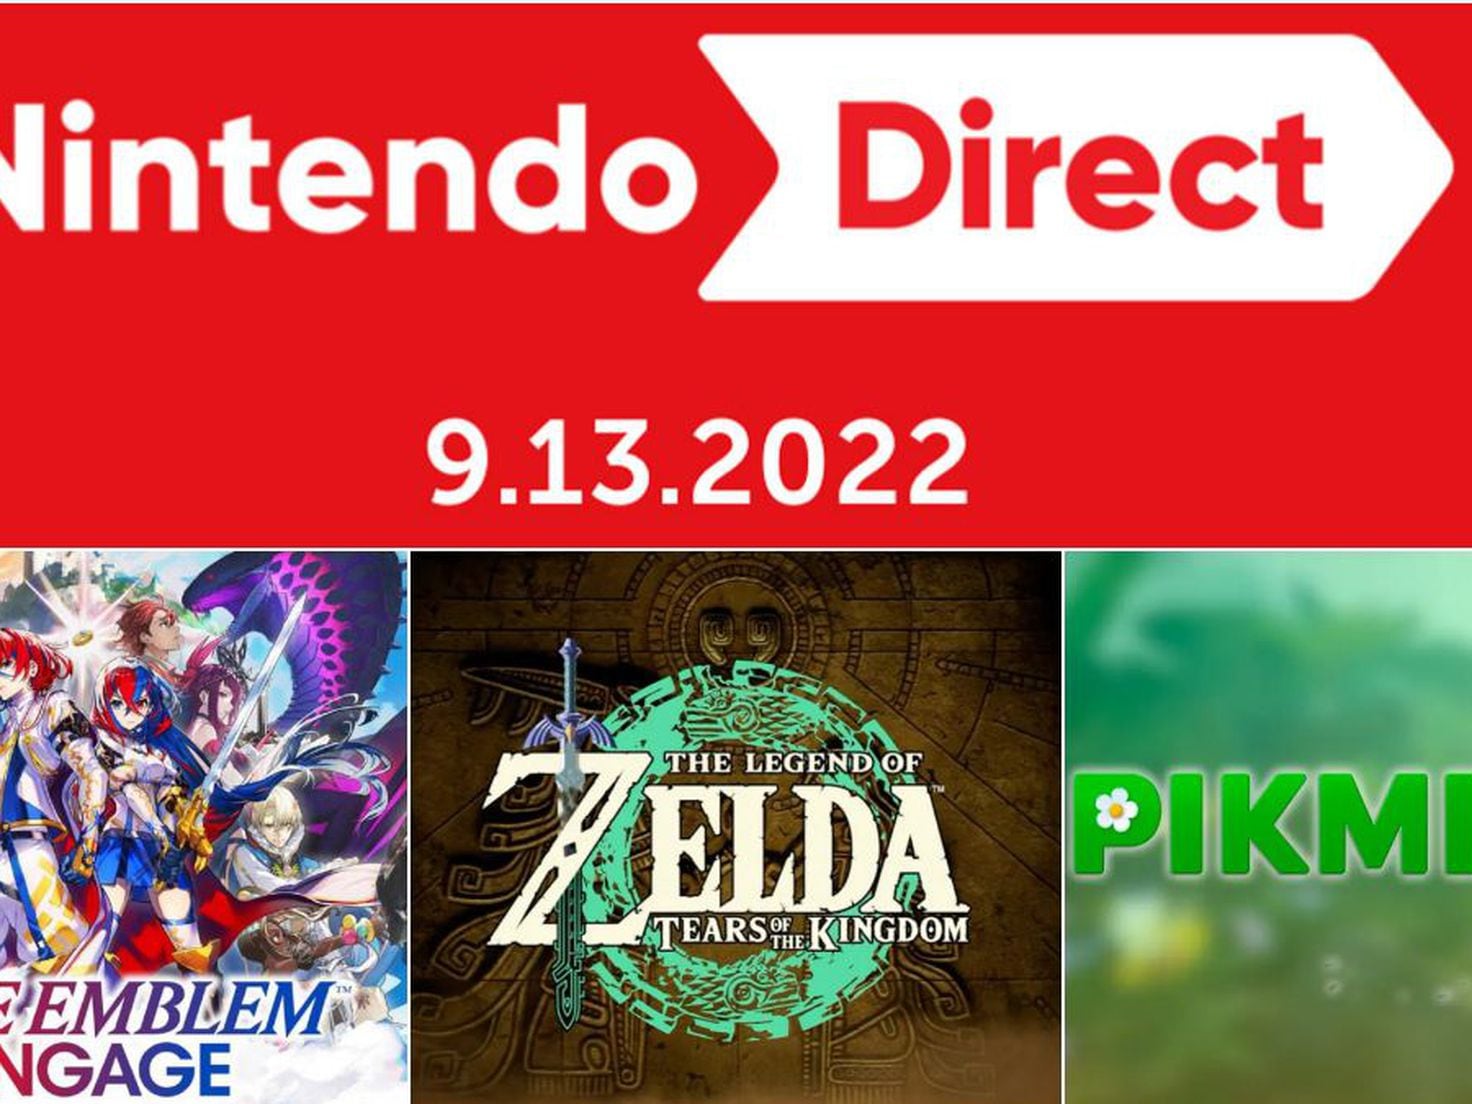 Here's when the February 2023 Nintendo Direct is happening